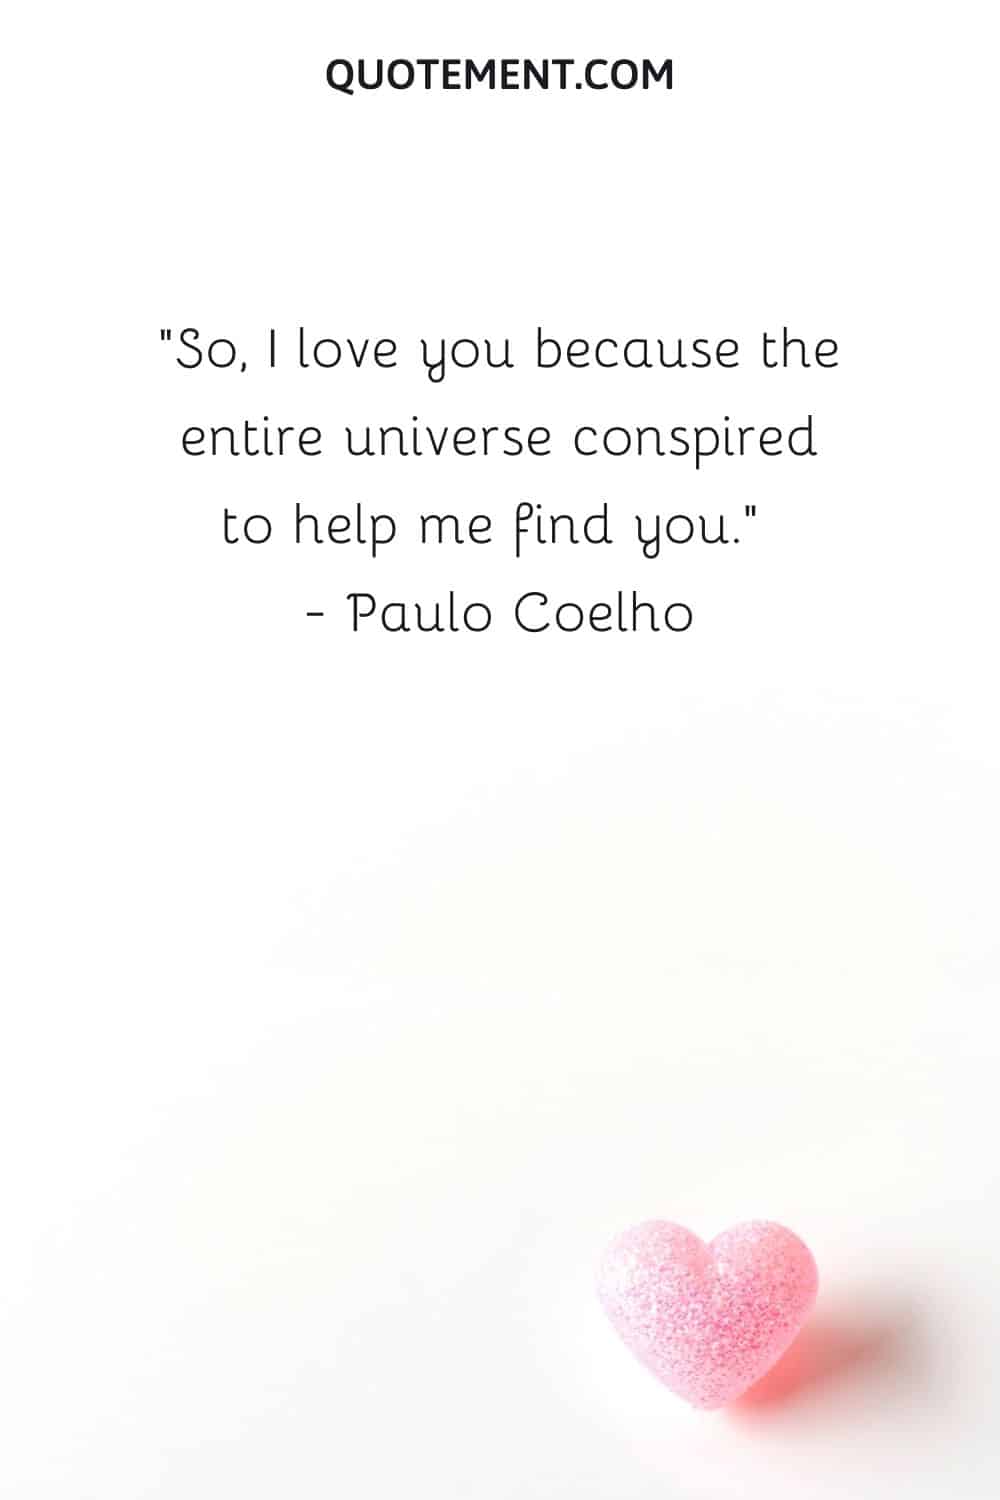 So, I love you because the entire universe conspired to help me find you.